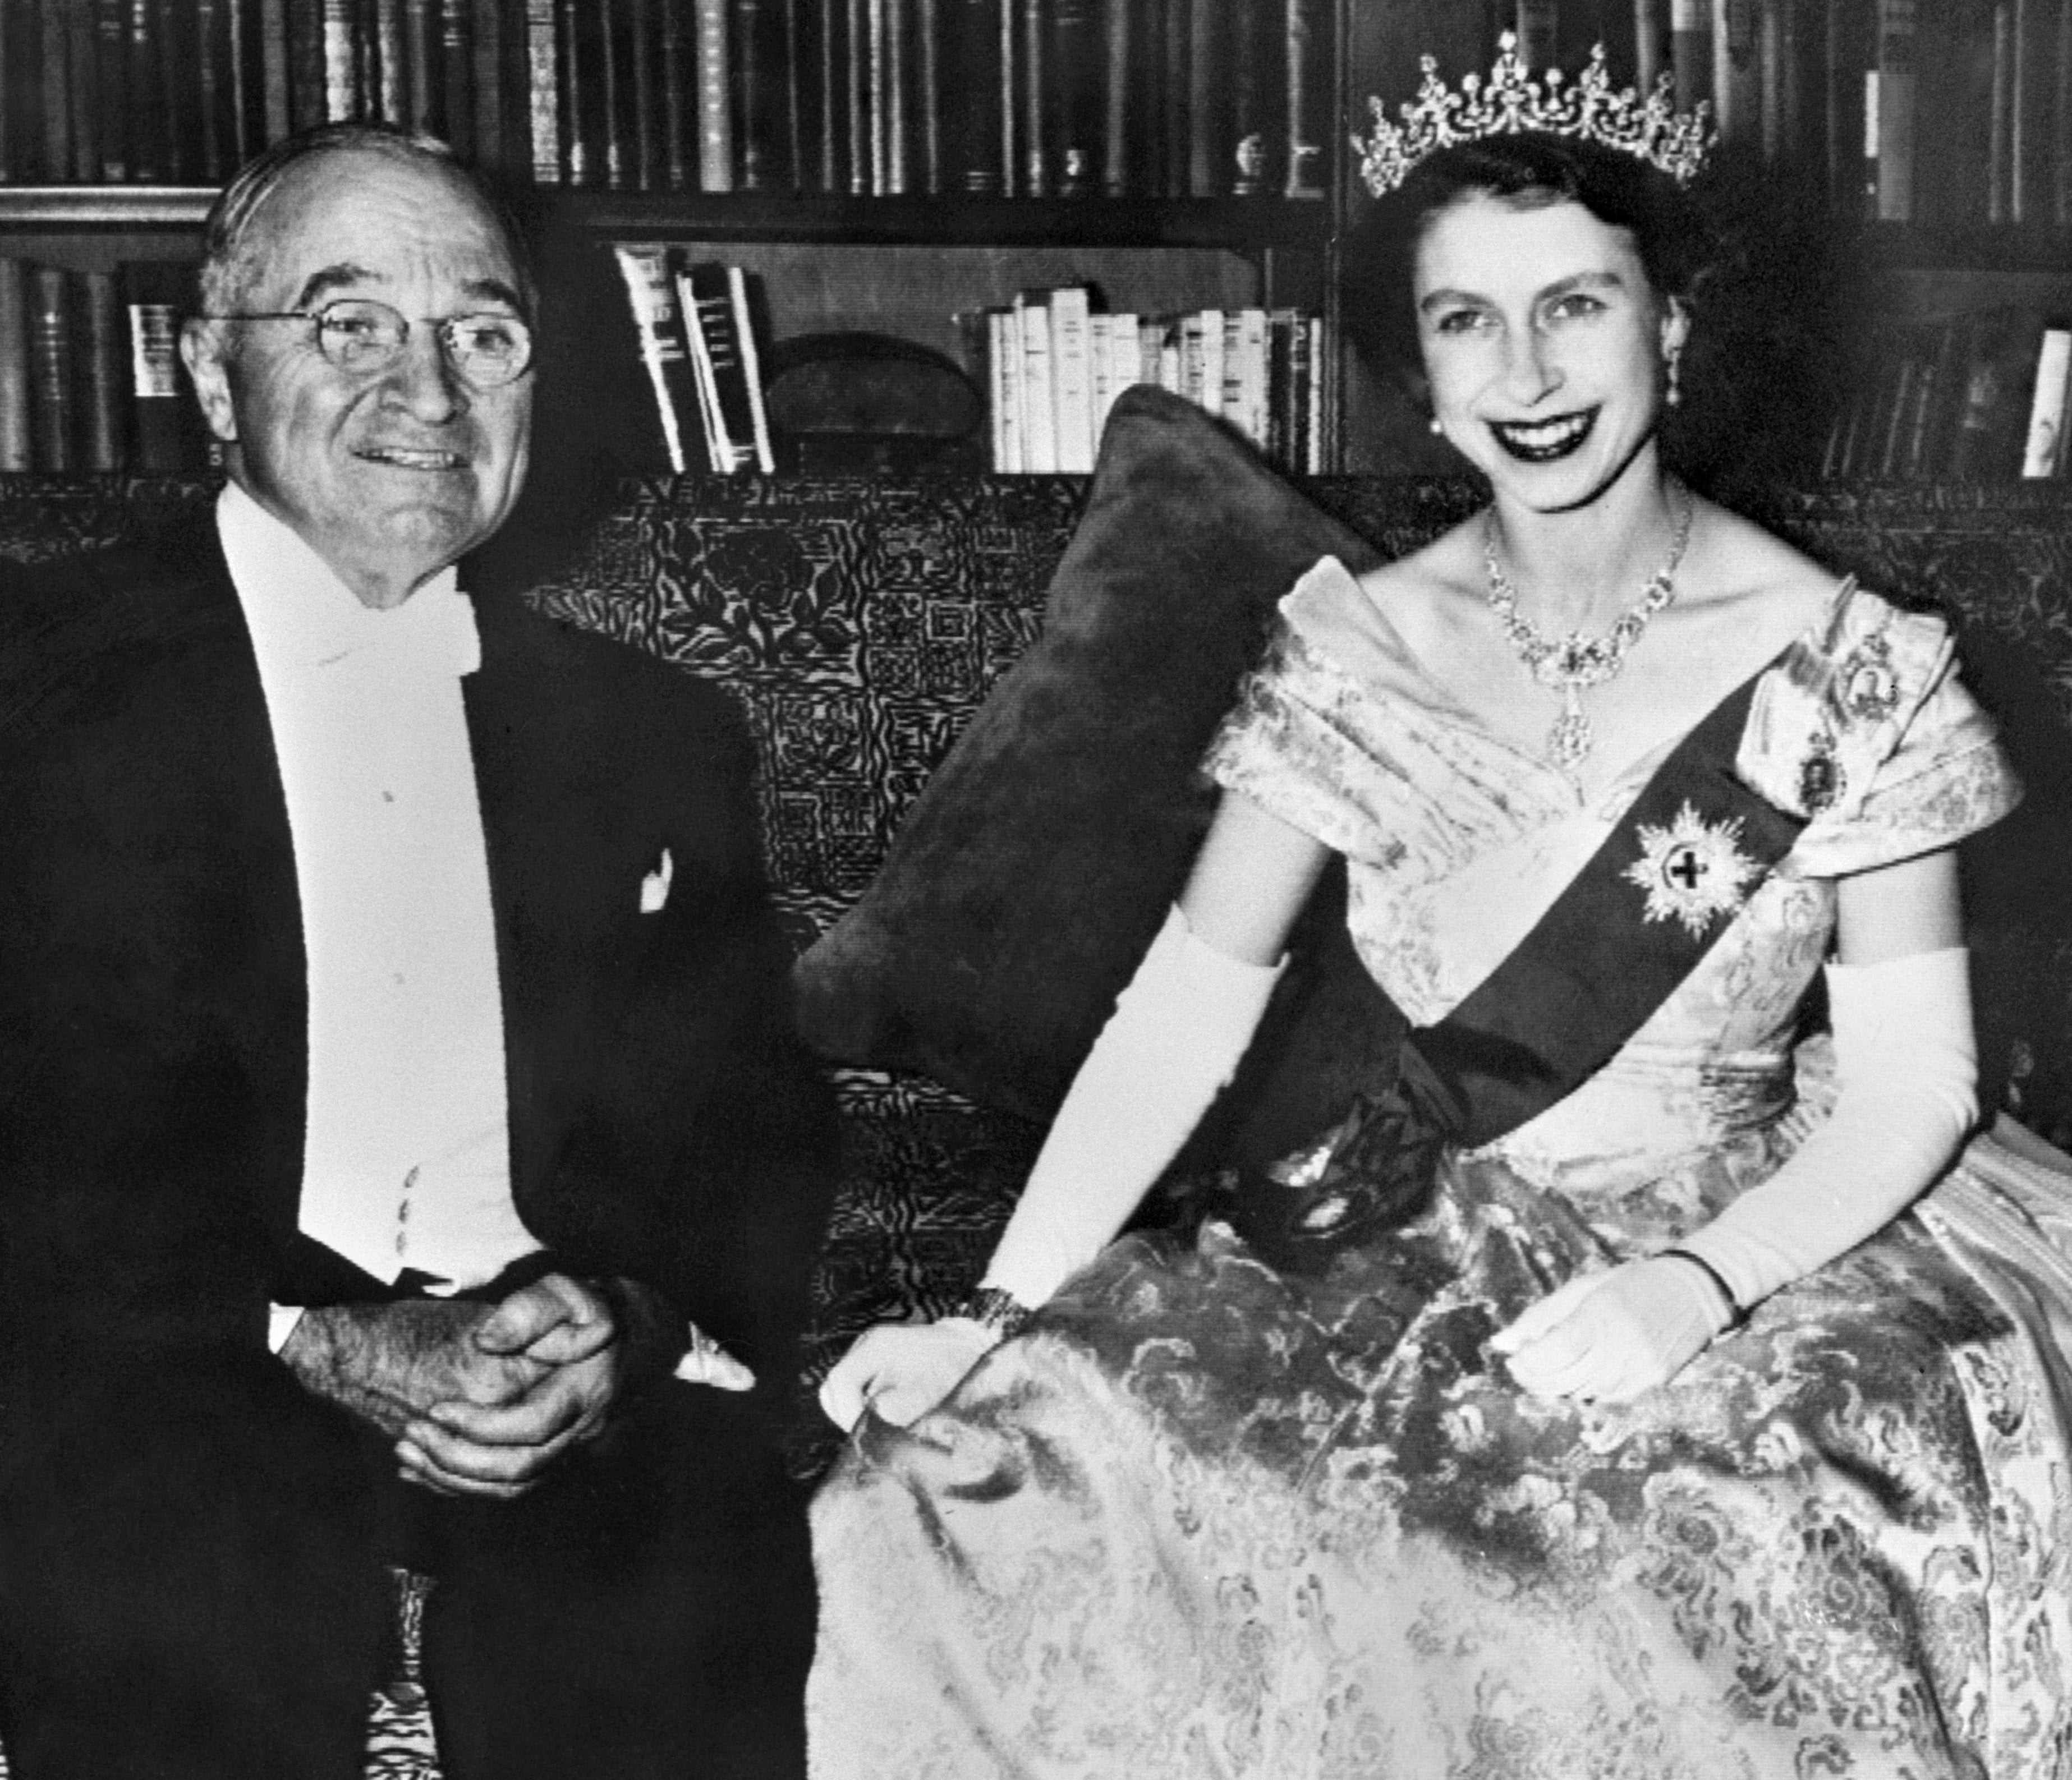 The then Princess Elizabeth poses with President Harry Truman in October 1951